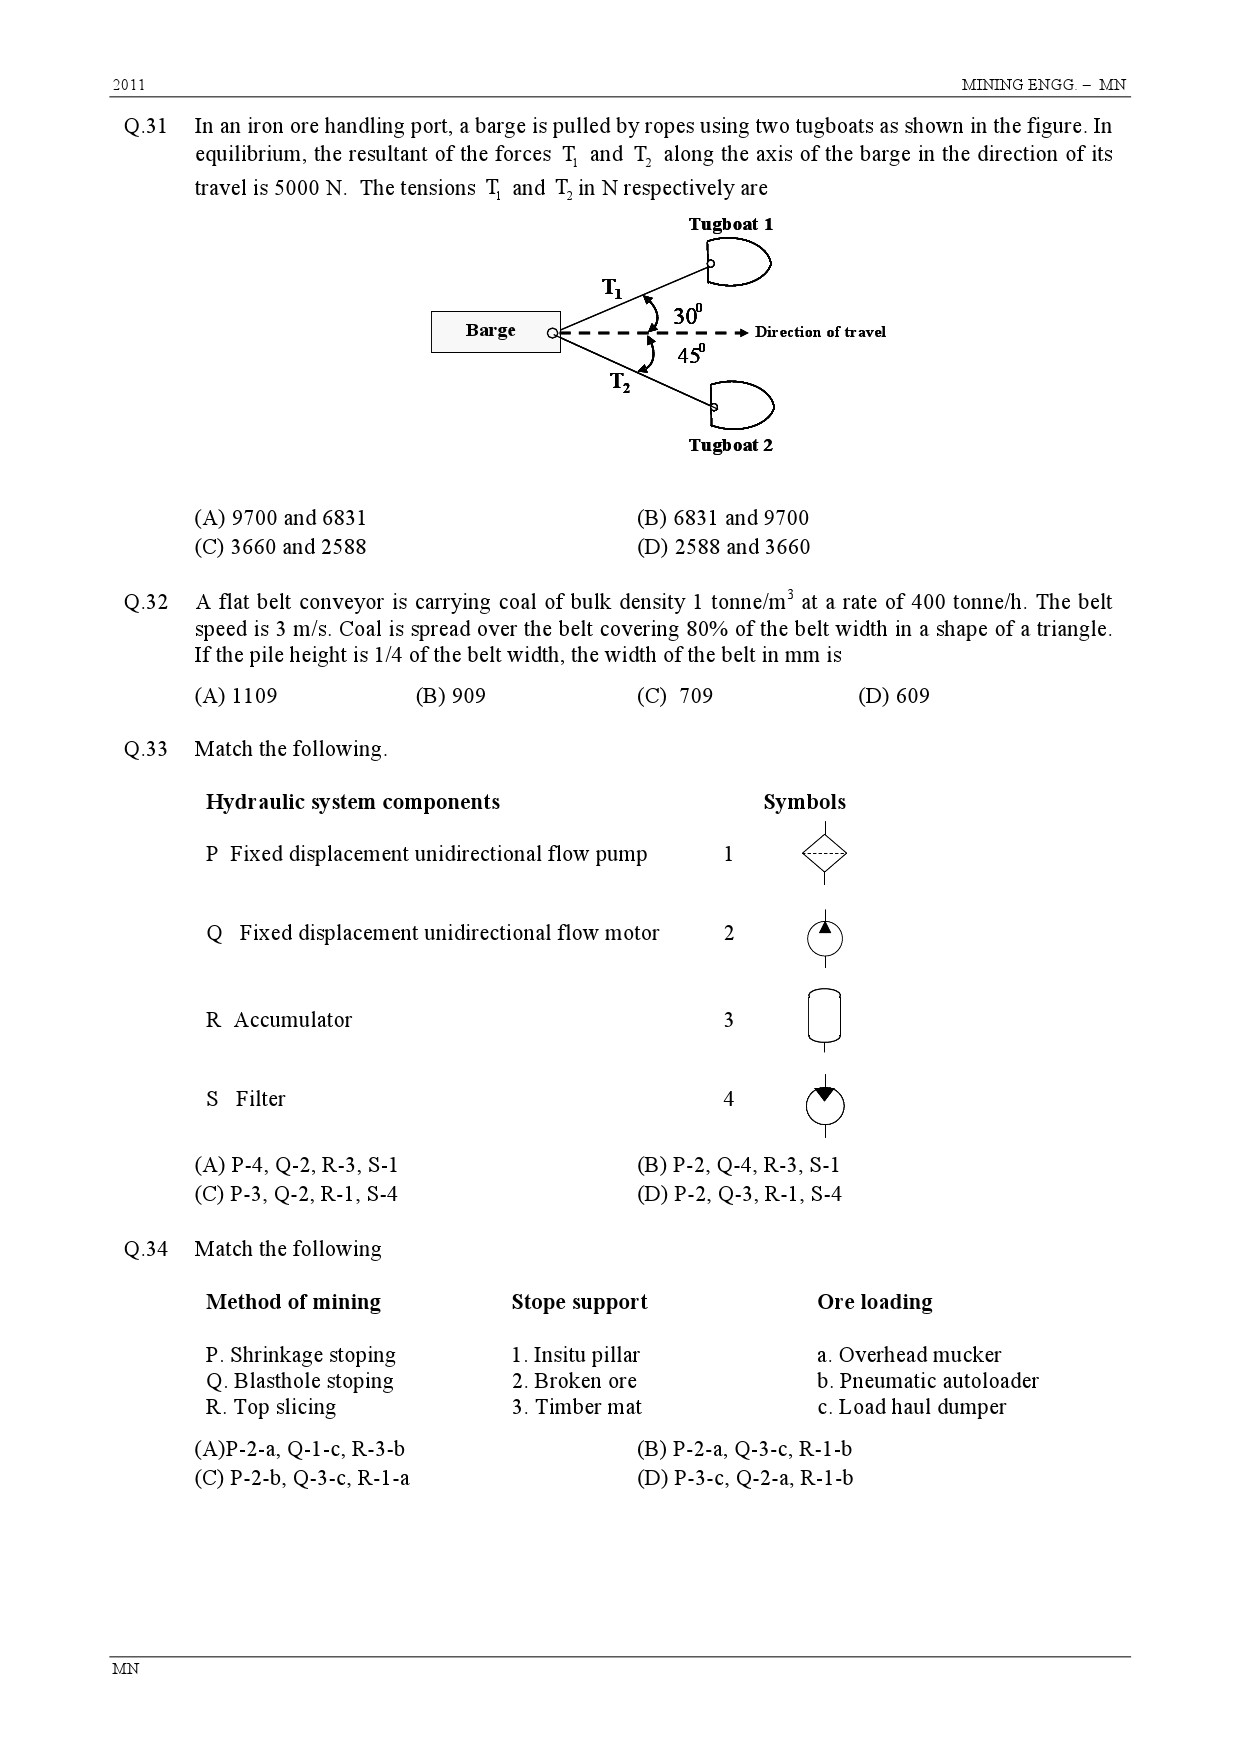 GATE Exam Question Paper 2011 Mining Engineering 6